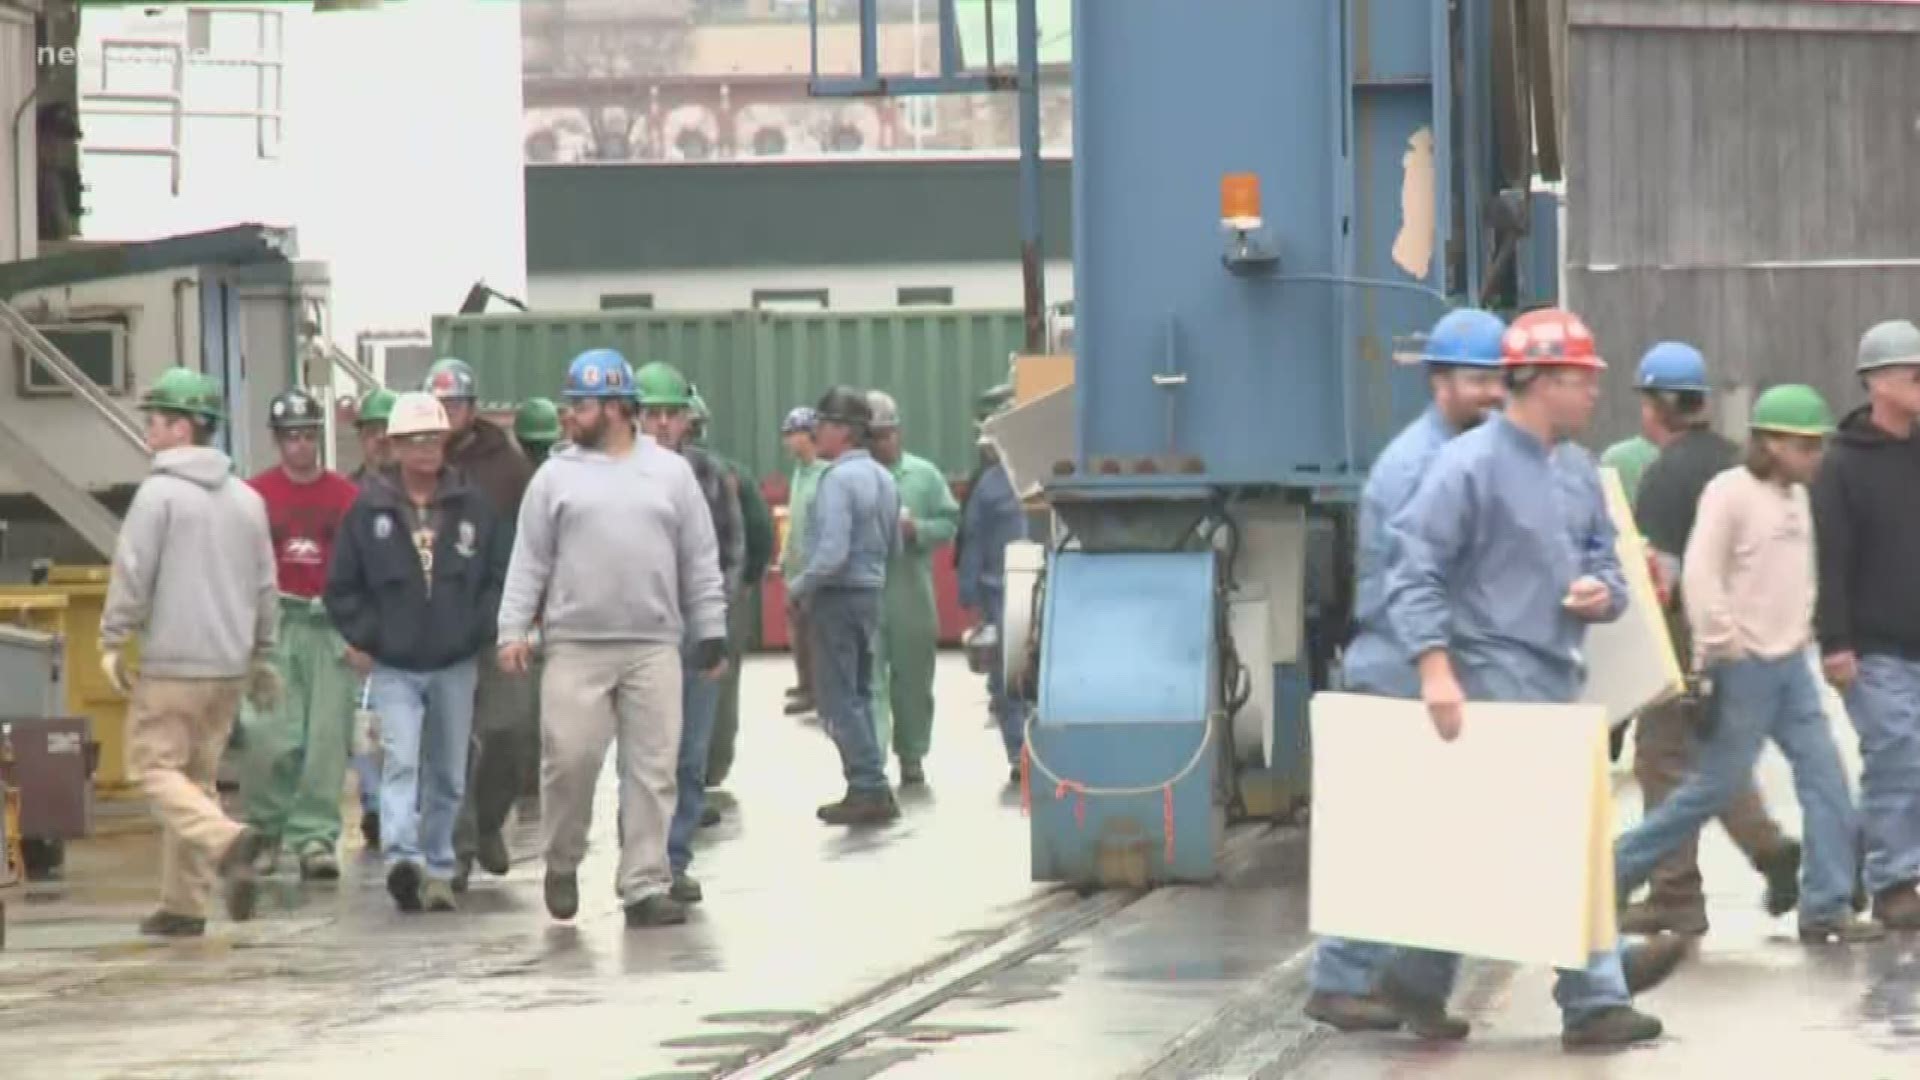 An employee at Bath Iron Works has tested positive for COVID-19. The company says the person was last at work on March 13.